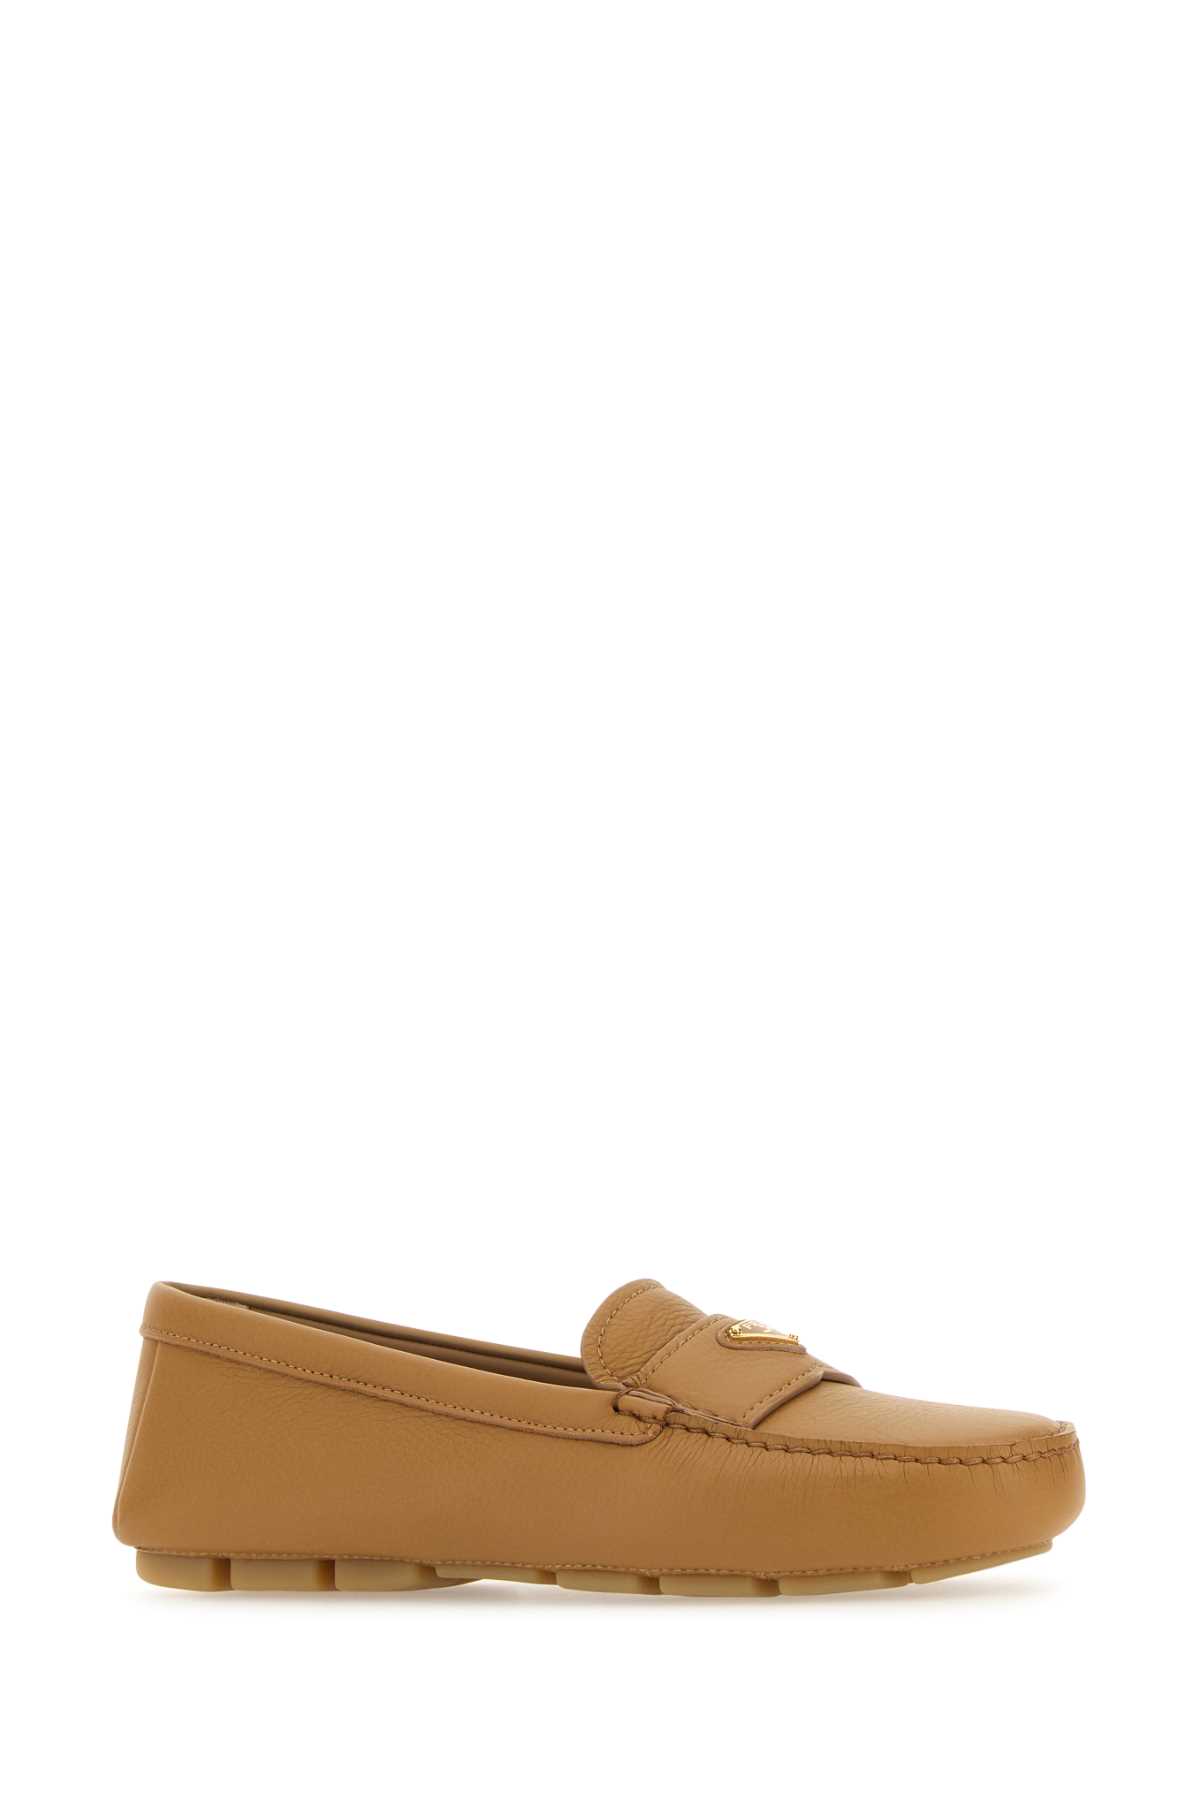 Prada Camel Leather Loafers In Brown